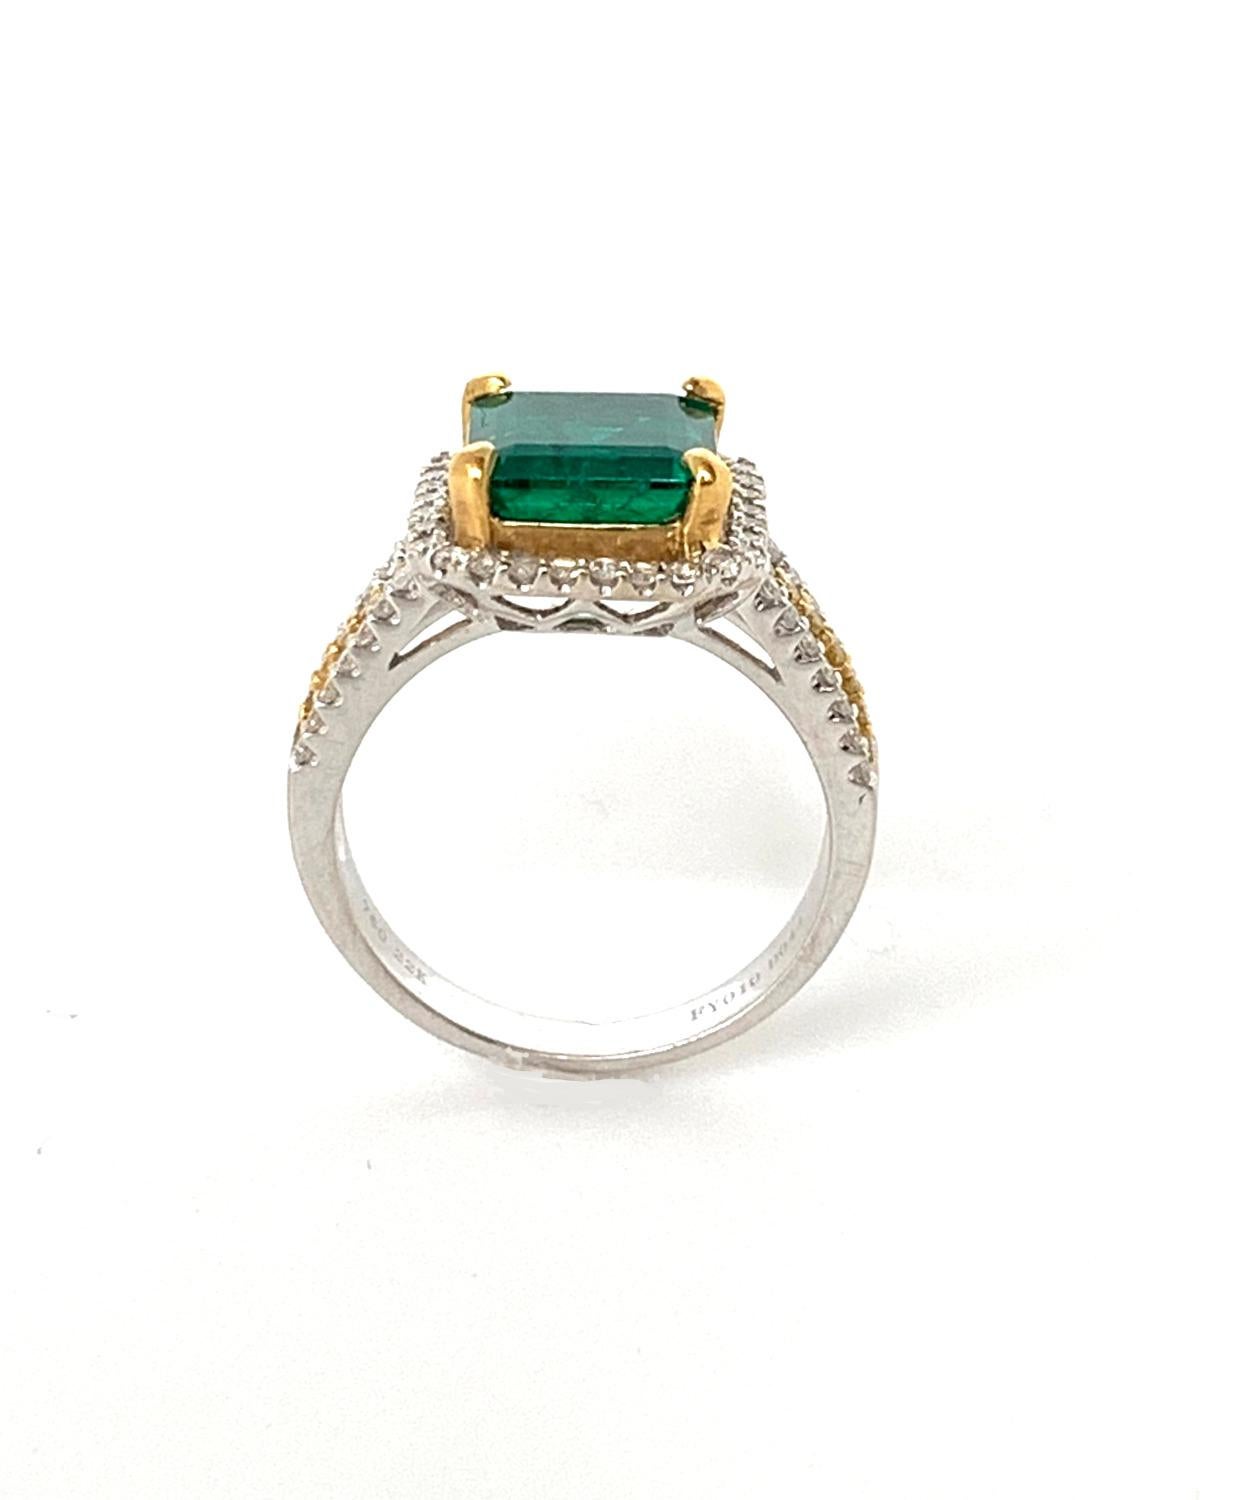 2.85 Carat Emerald Cocktail Ring with Canary and White Diamonds in 18k Gold For Sale 3